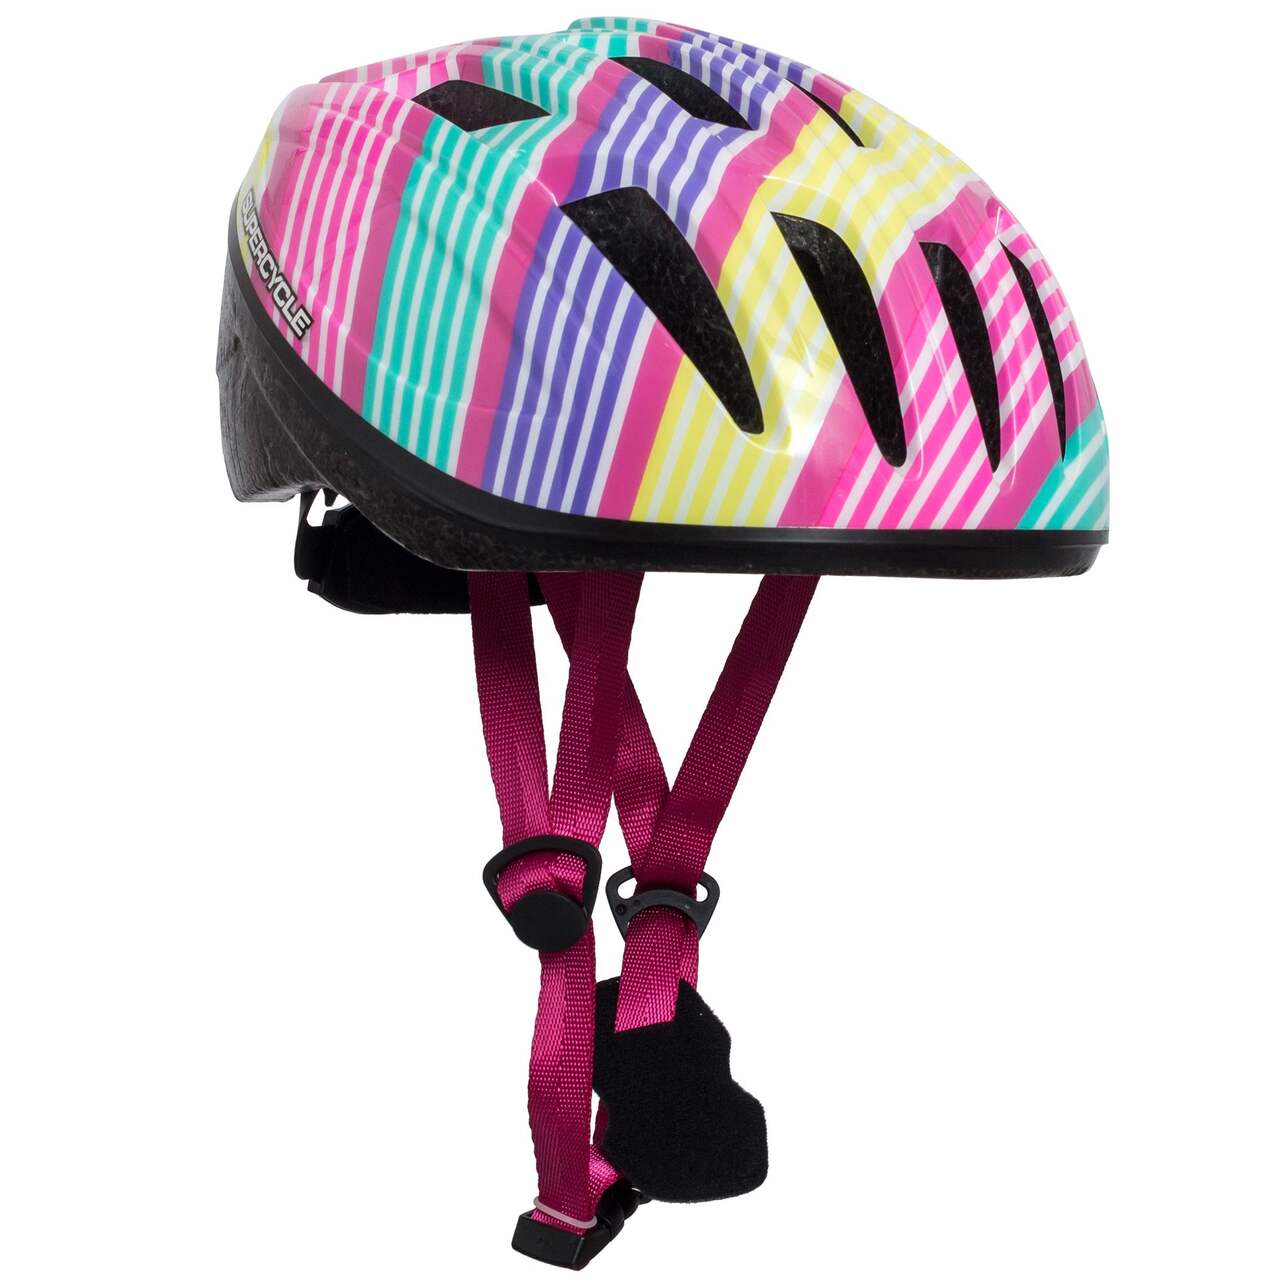 Supercycle Stripes Crosstrails Kids' Bike Helmet w/Adjustable Straps, Multi-Colour, Ages 5+ Front_Three_Fourths_Angled_Right